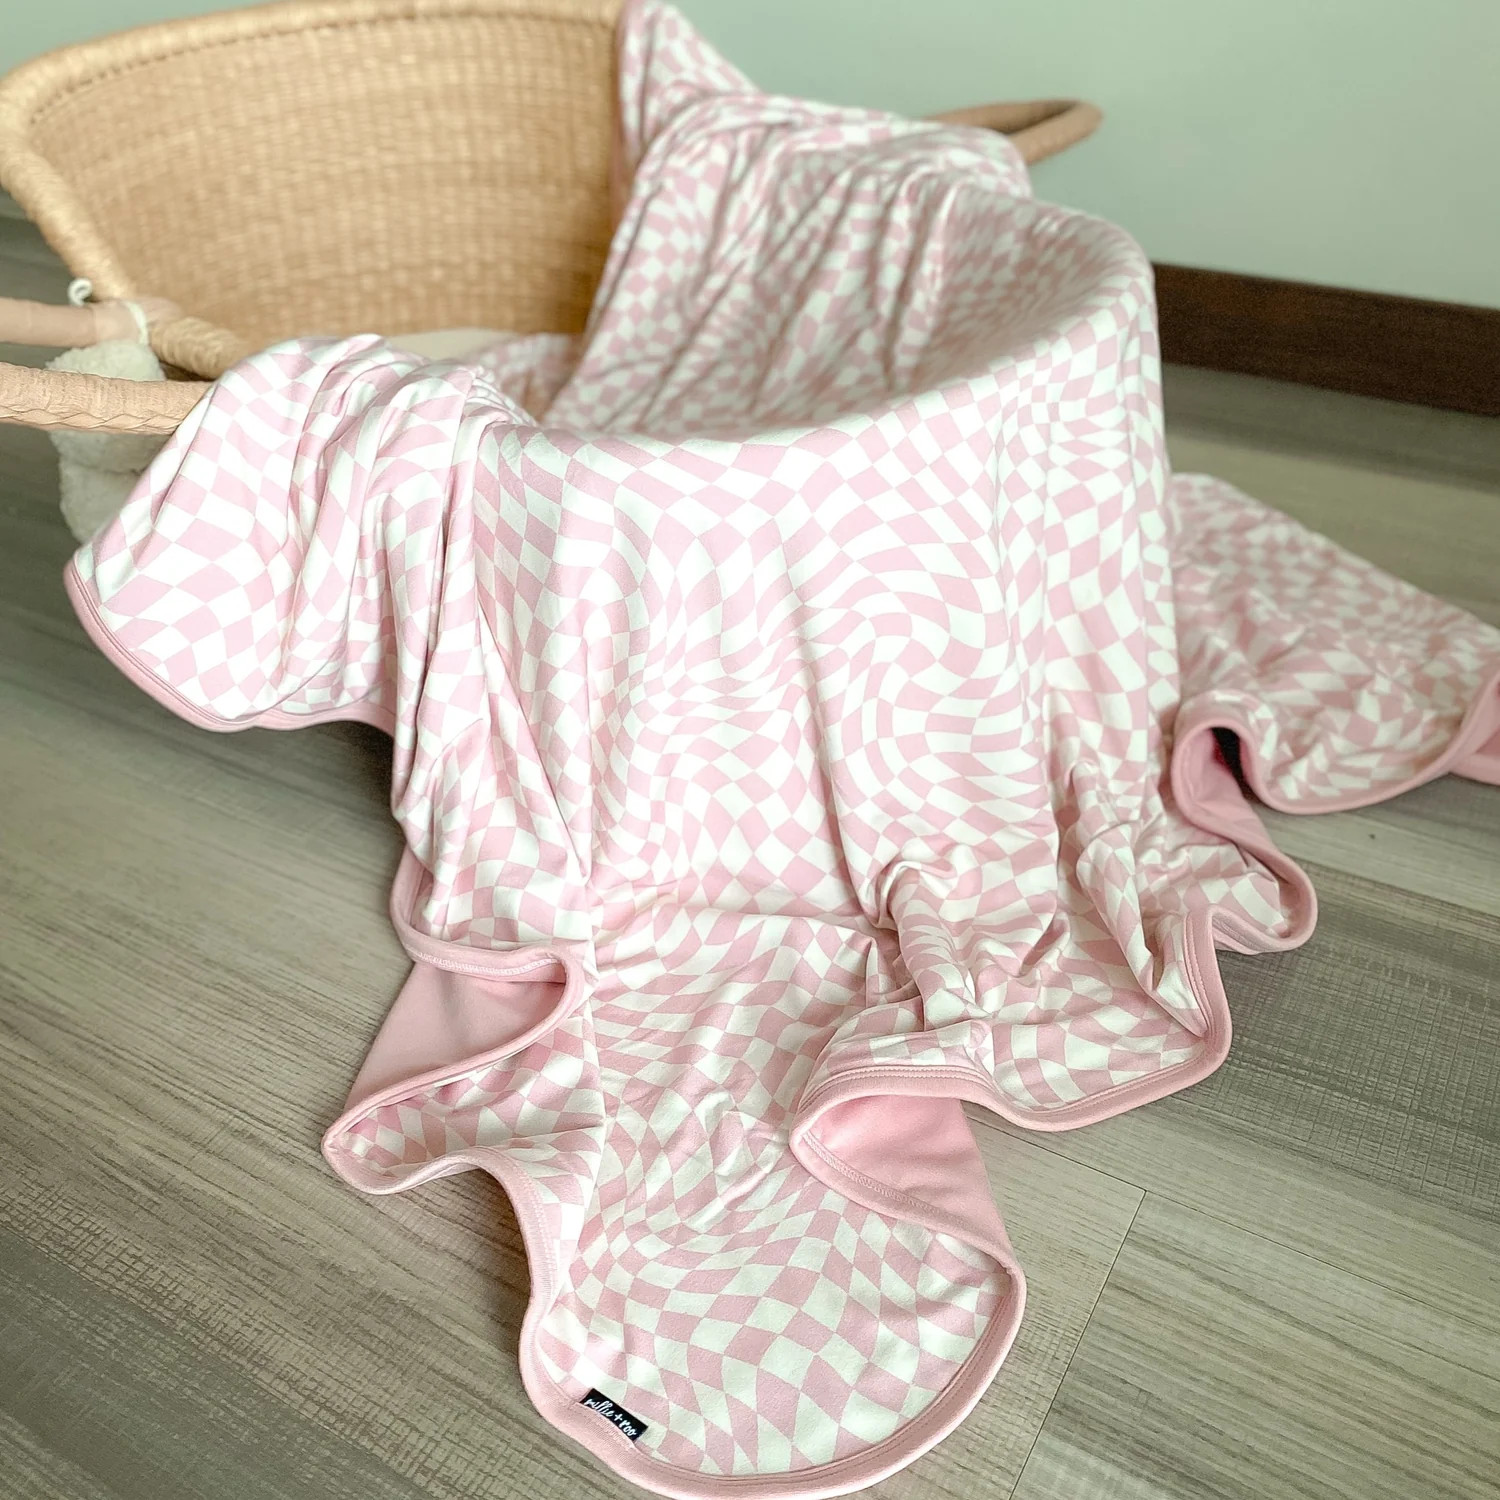 OVERSIZED COZY BLANKET- Pink Dizzy Check | millie + roo